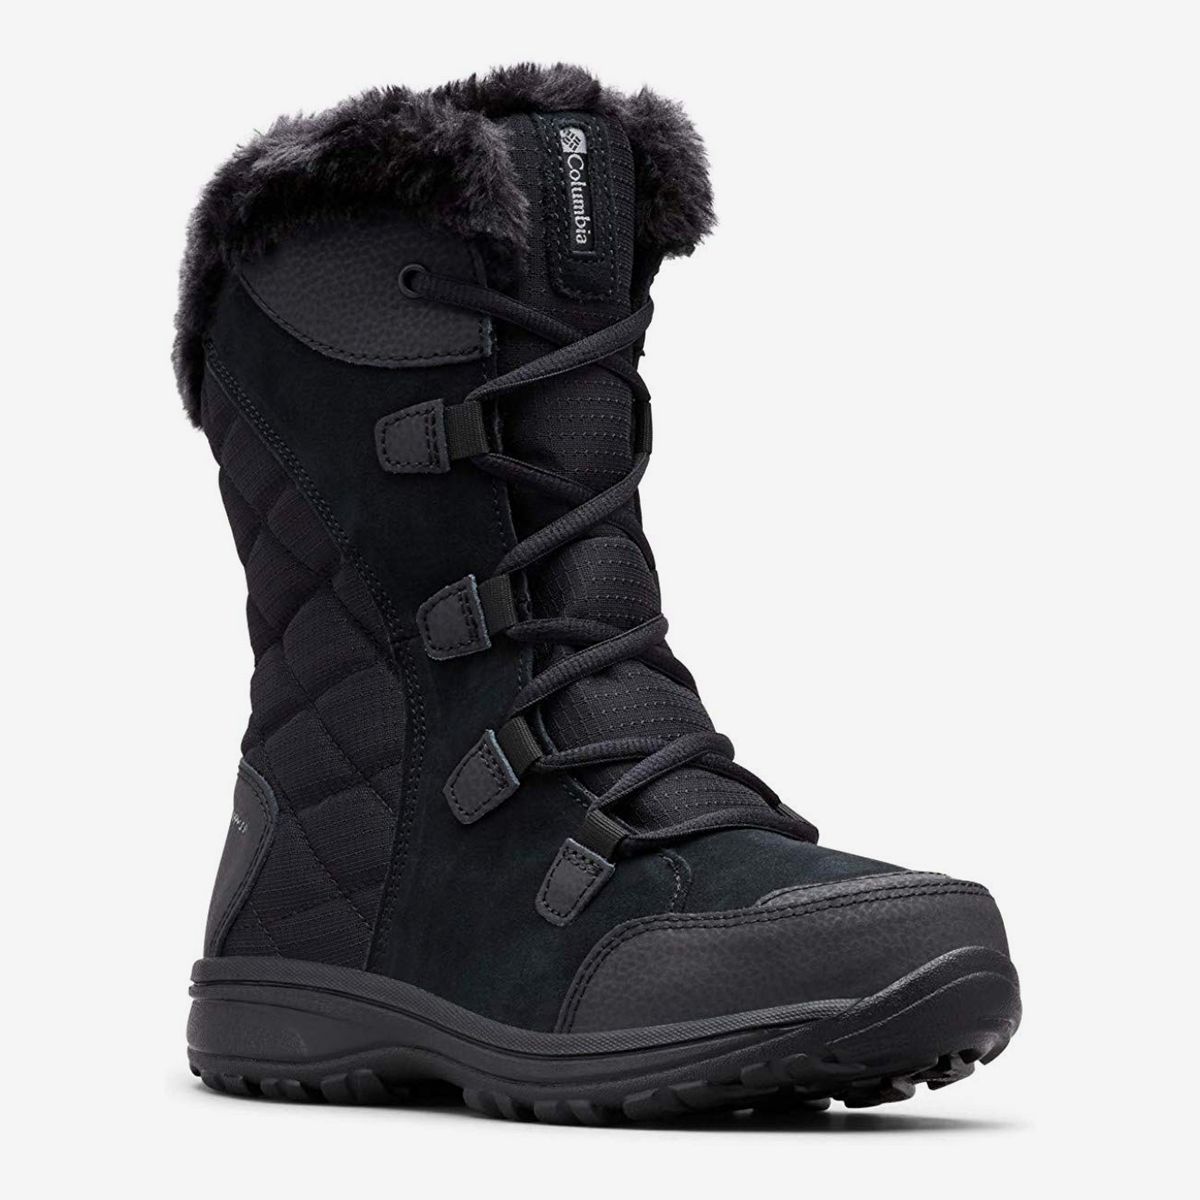 best winter boots for everyday wear